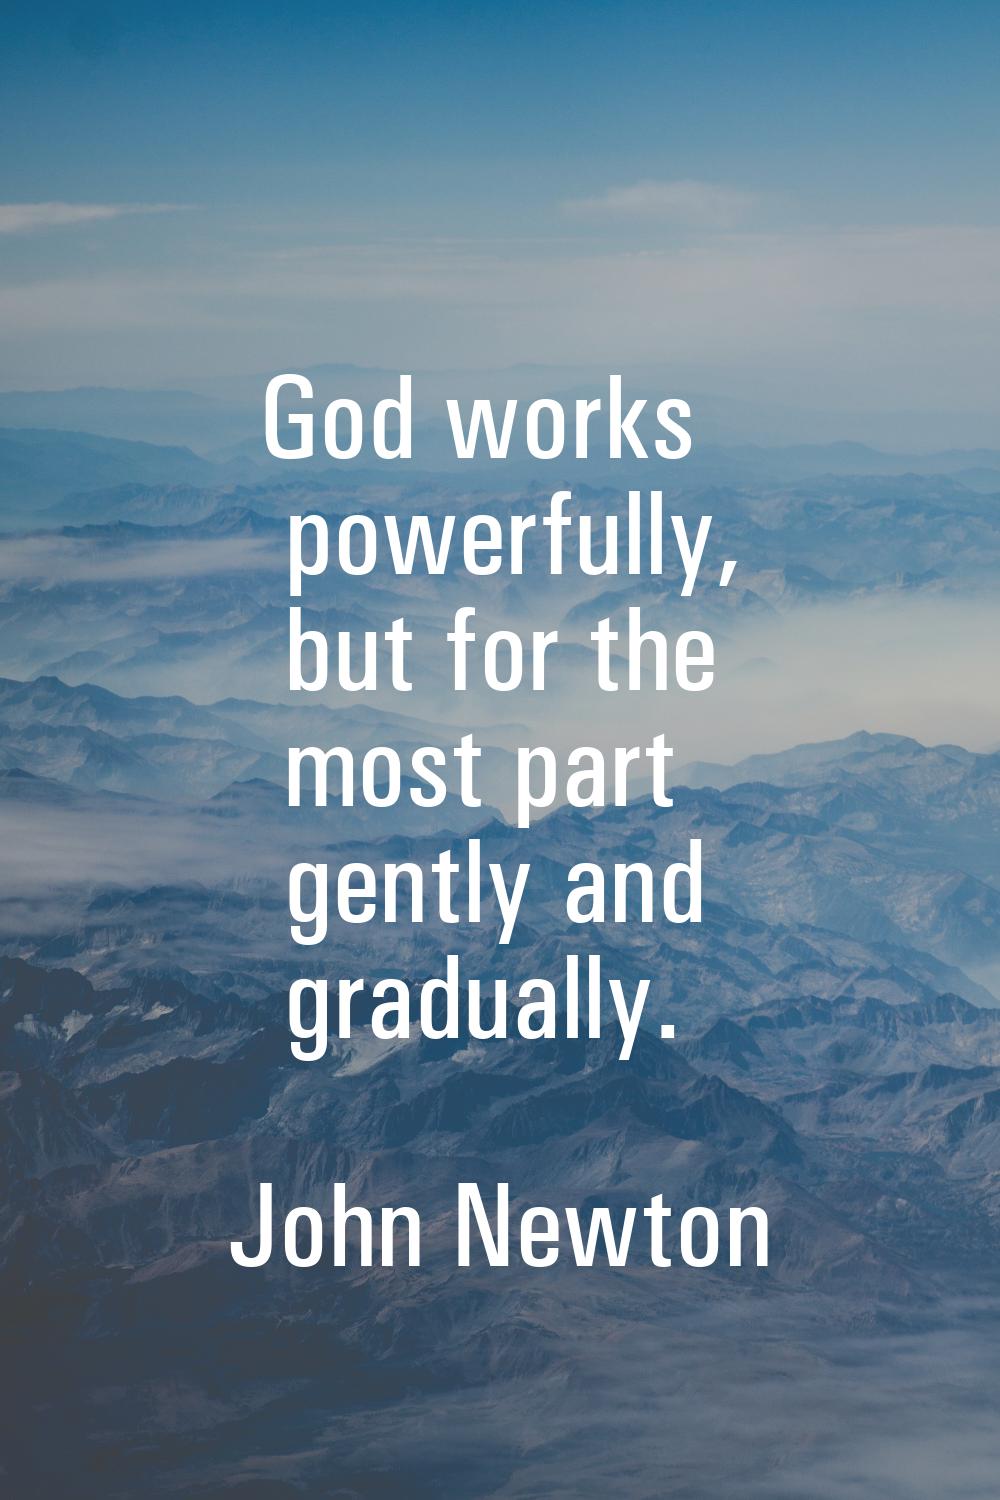 God works powerfully, but for the most part gently and gradually.